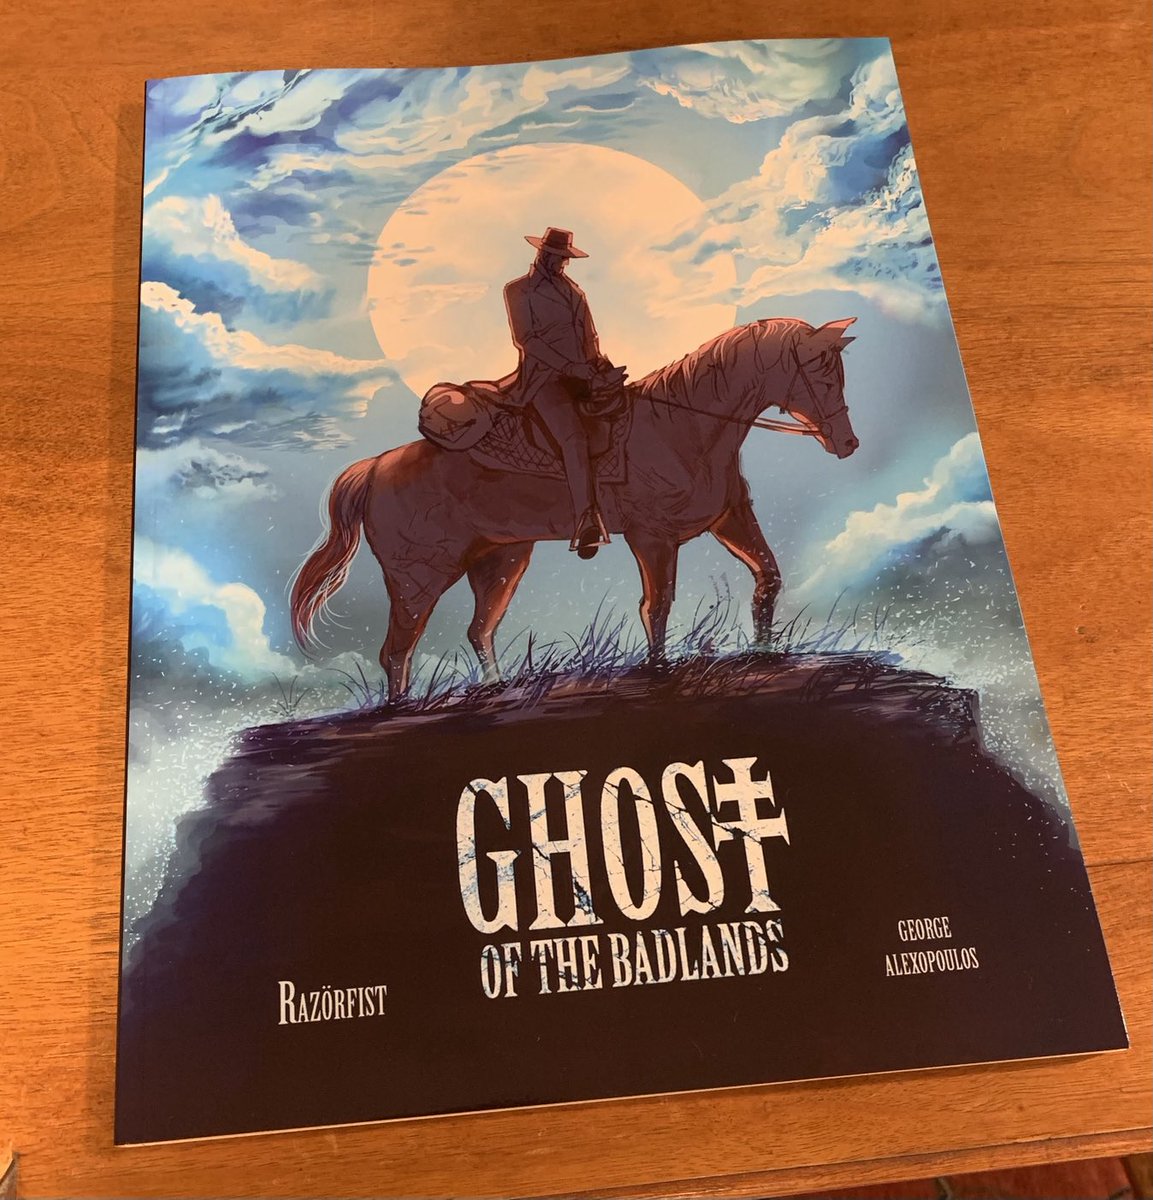 ⁦@RAZ0RFIST⁩ ⁦@GPrime85⁩ gentlemen this book was fantastic! Love the vibe of Tombstone meets Phantom of the Opera, with some Old Testament justice. Sincerely hope you two collaborate for another adventure.